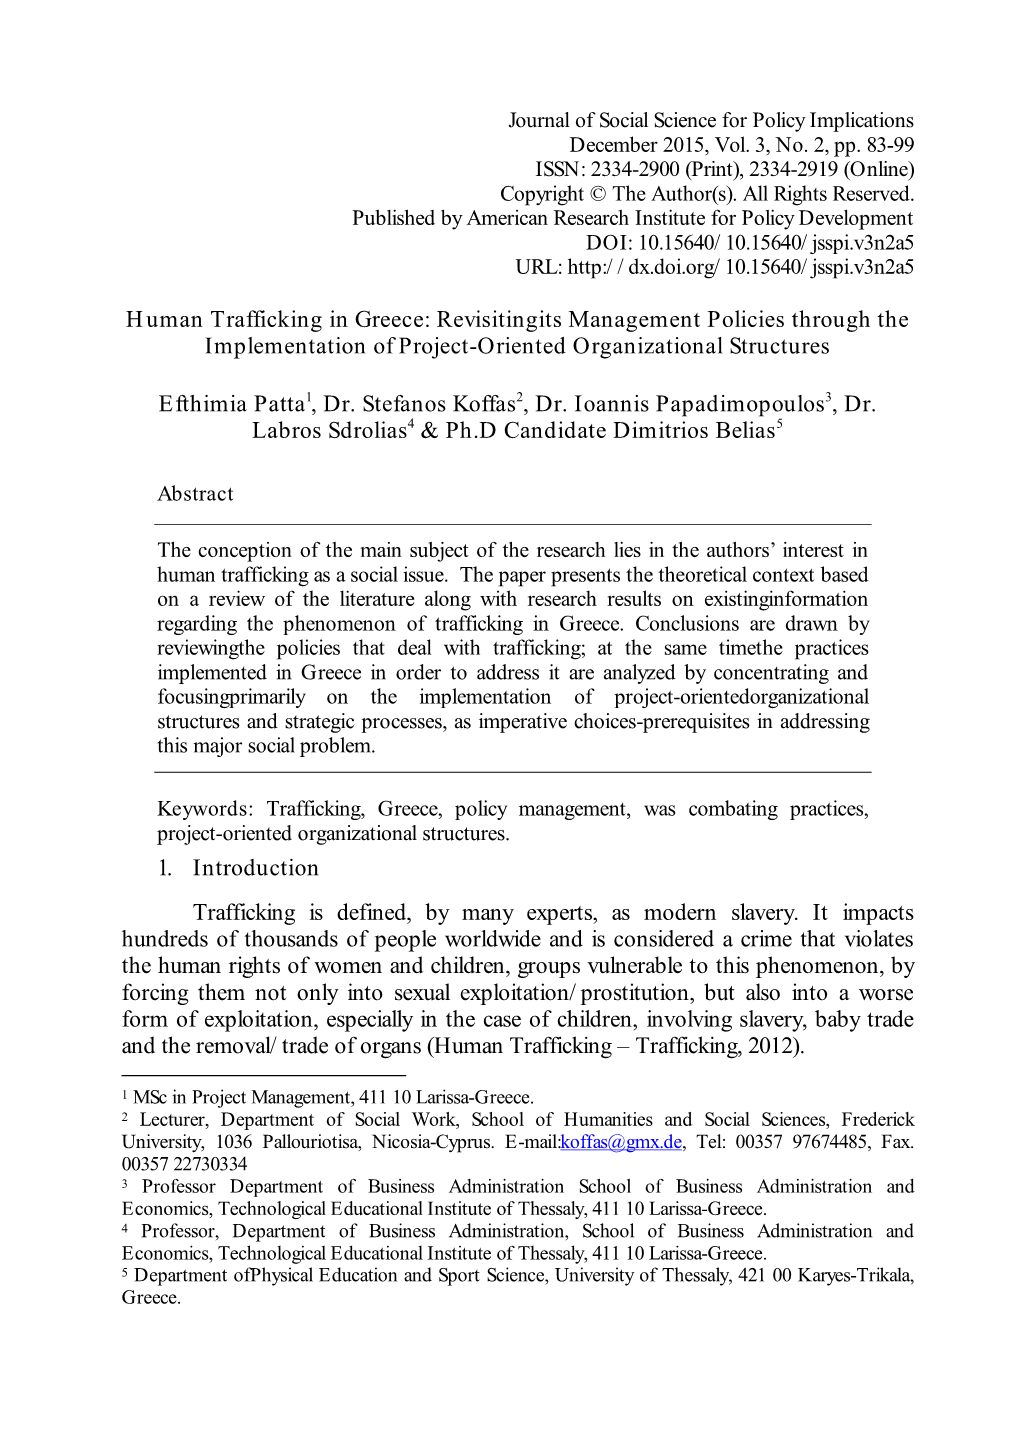 Human Trafficking in Greece: Revisitingits Management Policies Through the Implementation of Project-Oriented Organizational Structures